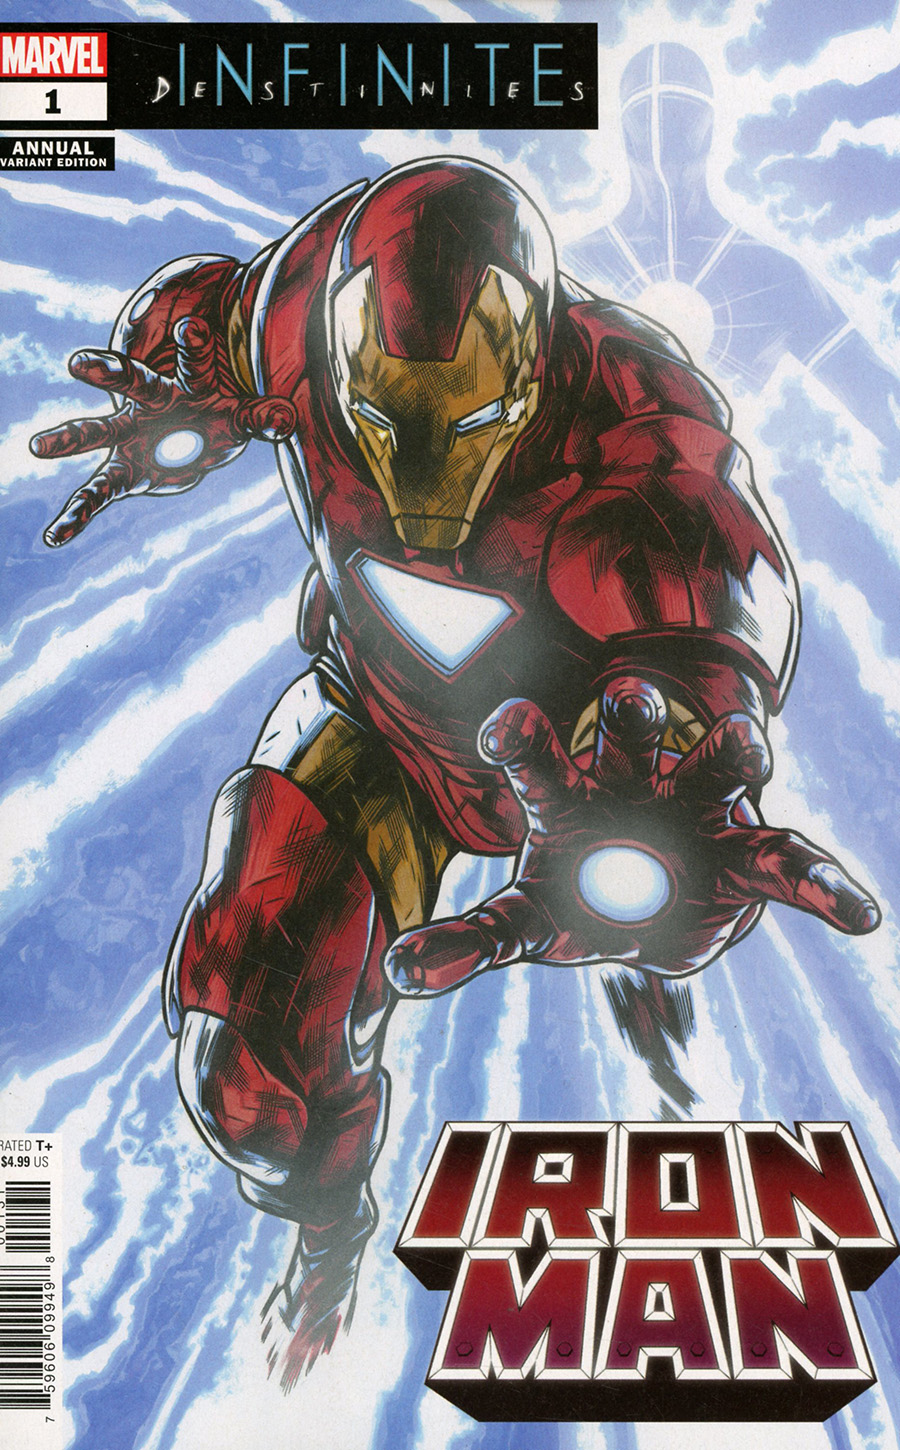 Iron Man Vol 6 Annual (2021) #1 Cover C Variant Travis Charest Cover (Infinite Destinies Tie-In)